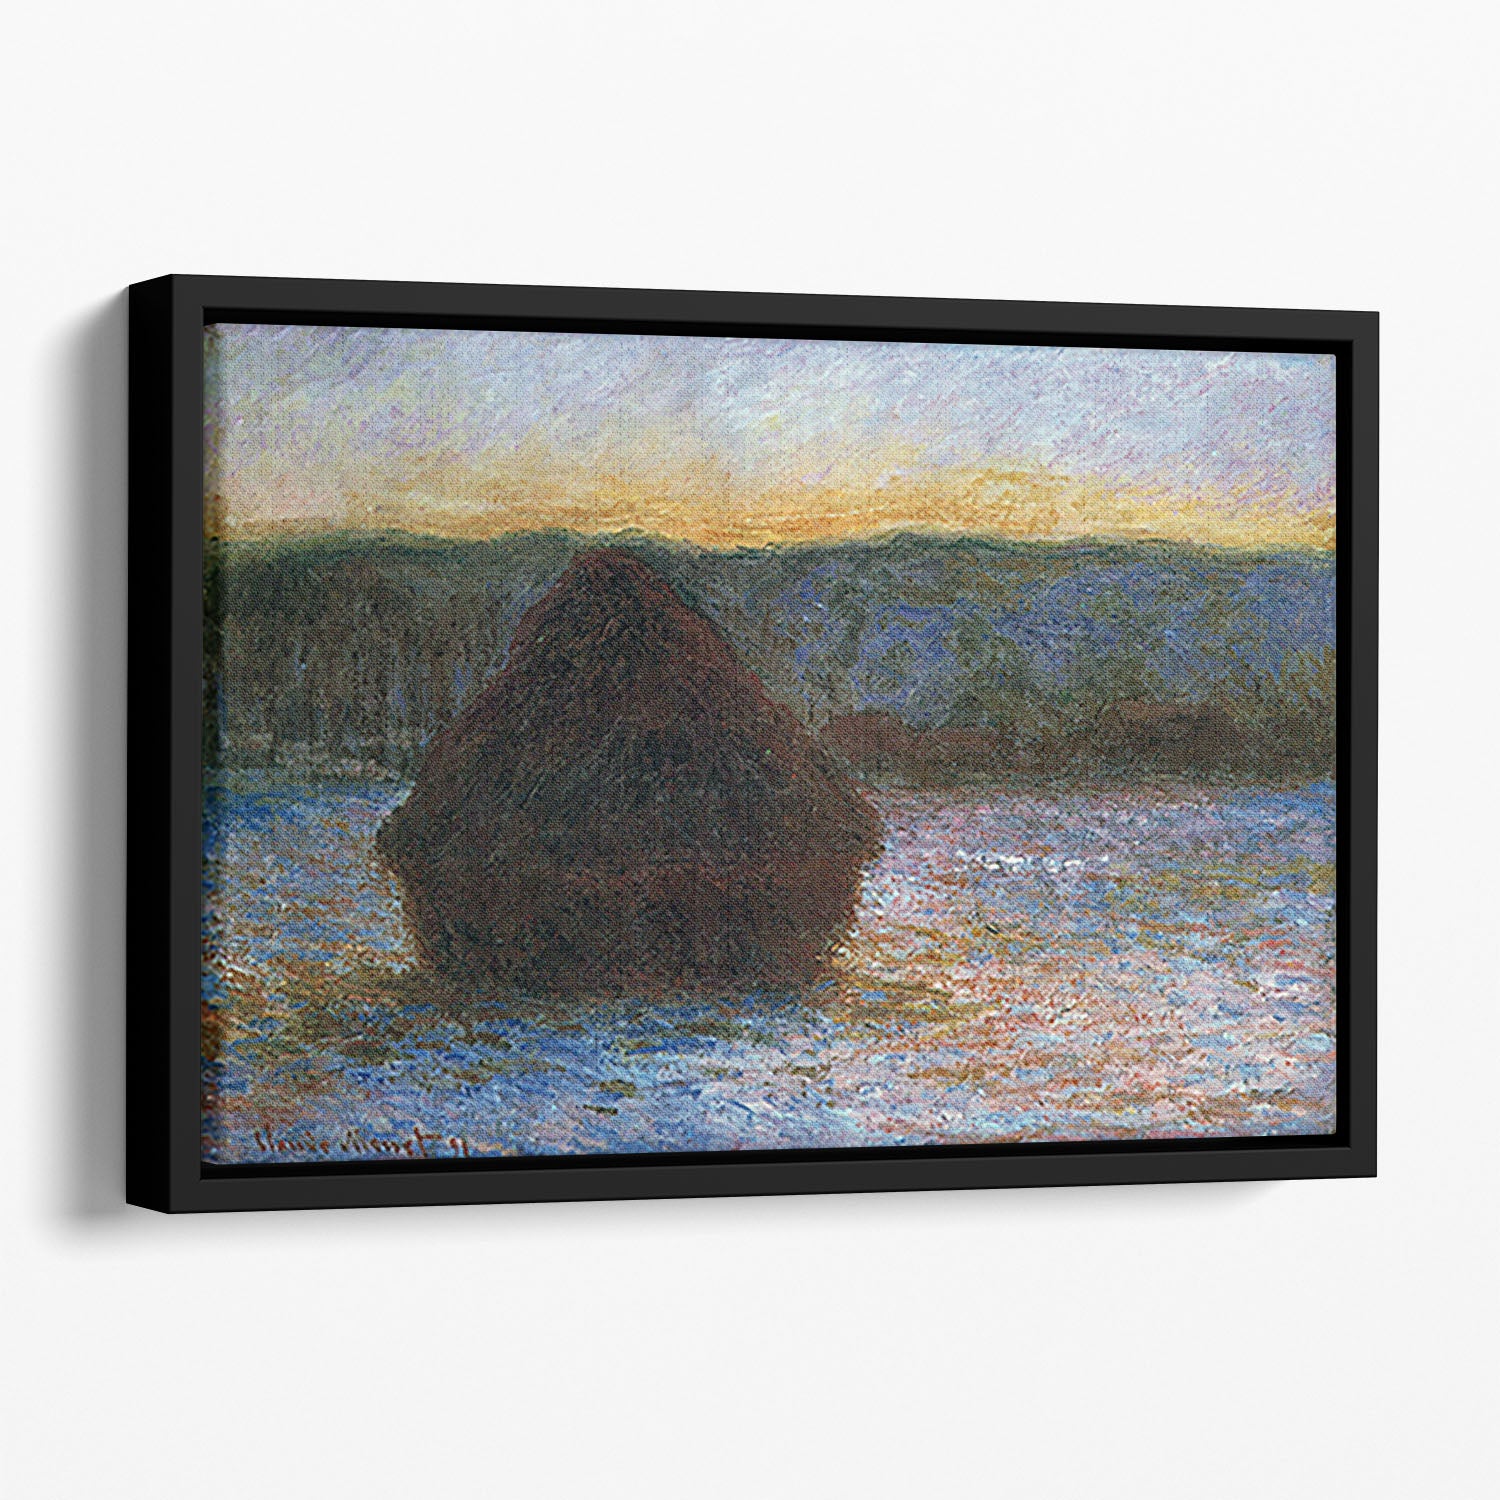 Haylofts thaw sunset by Monet Floating Framed Canvas